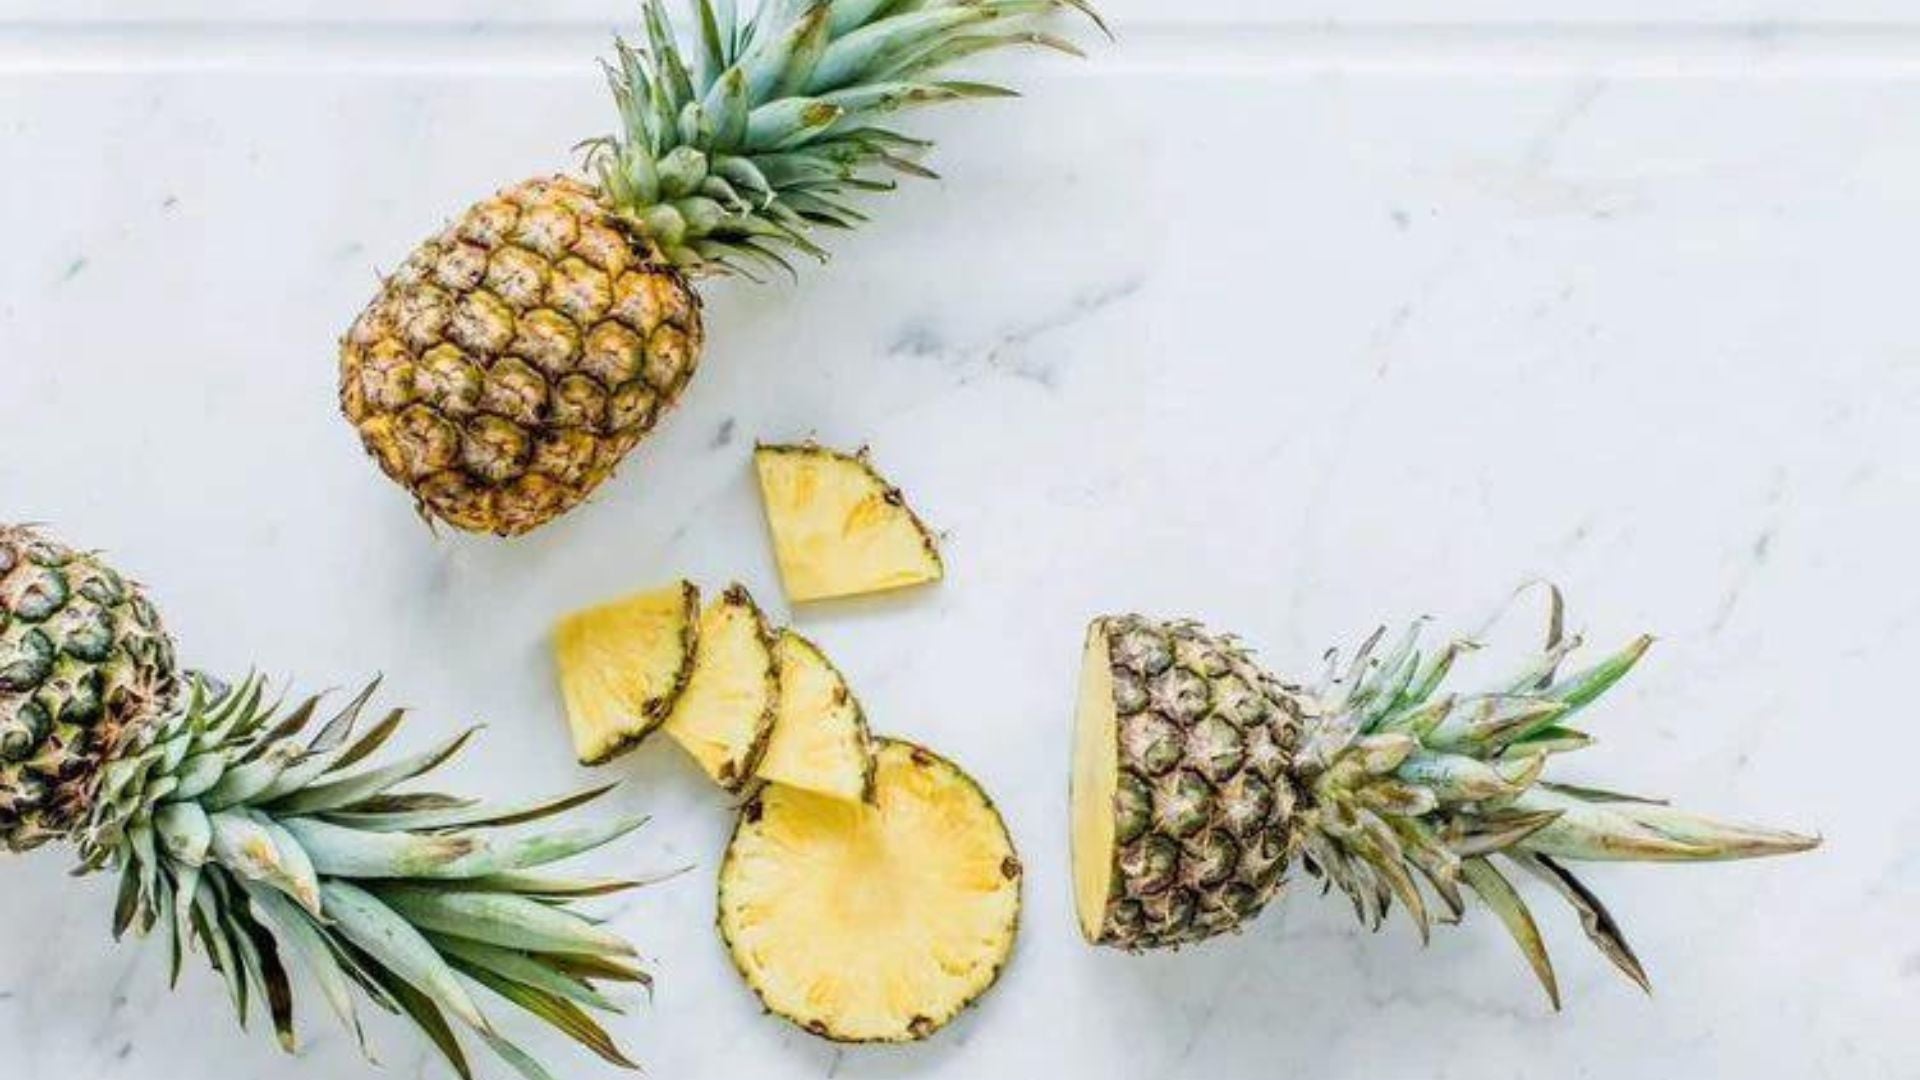 bromelain sourced from the pineapple fruit